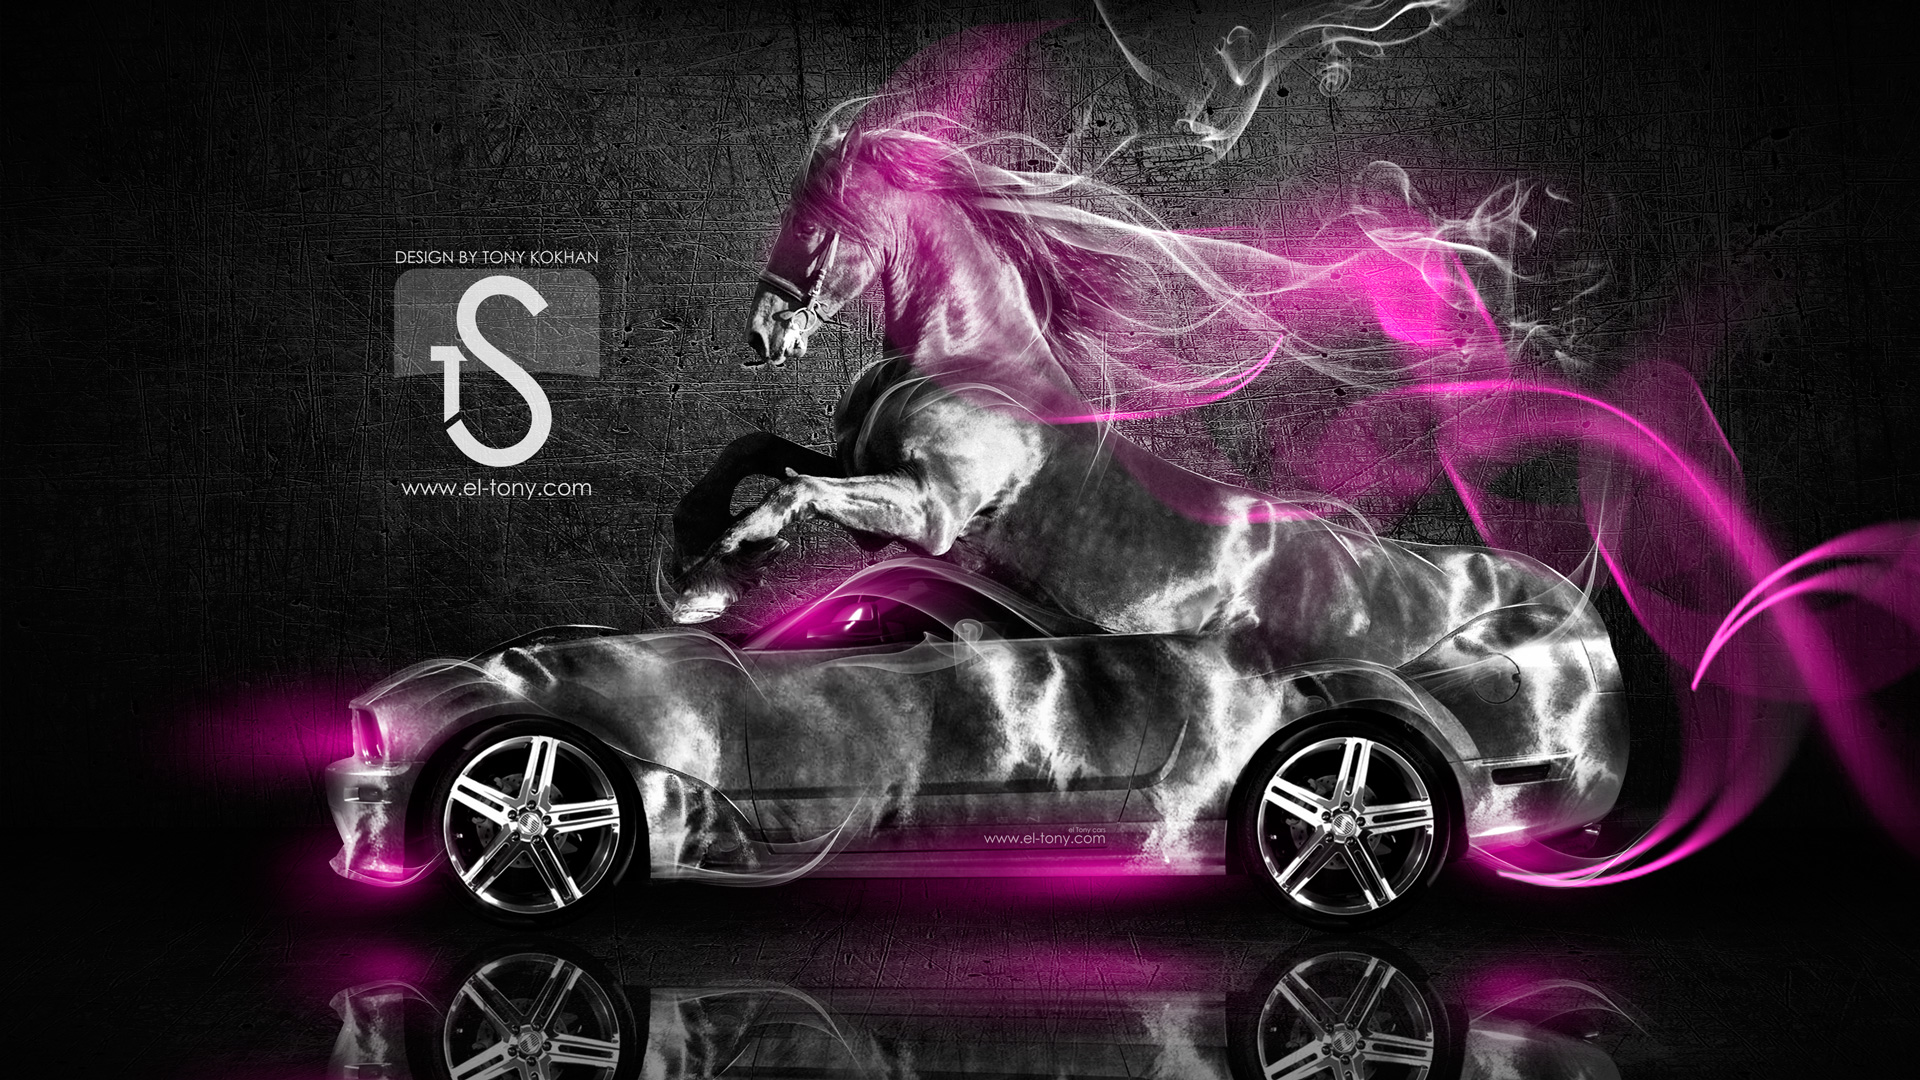 Ford Mustang Gt Fantasy Horse Smoke Car Pink Neon Design By Tony